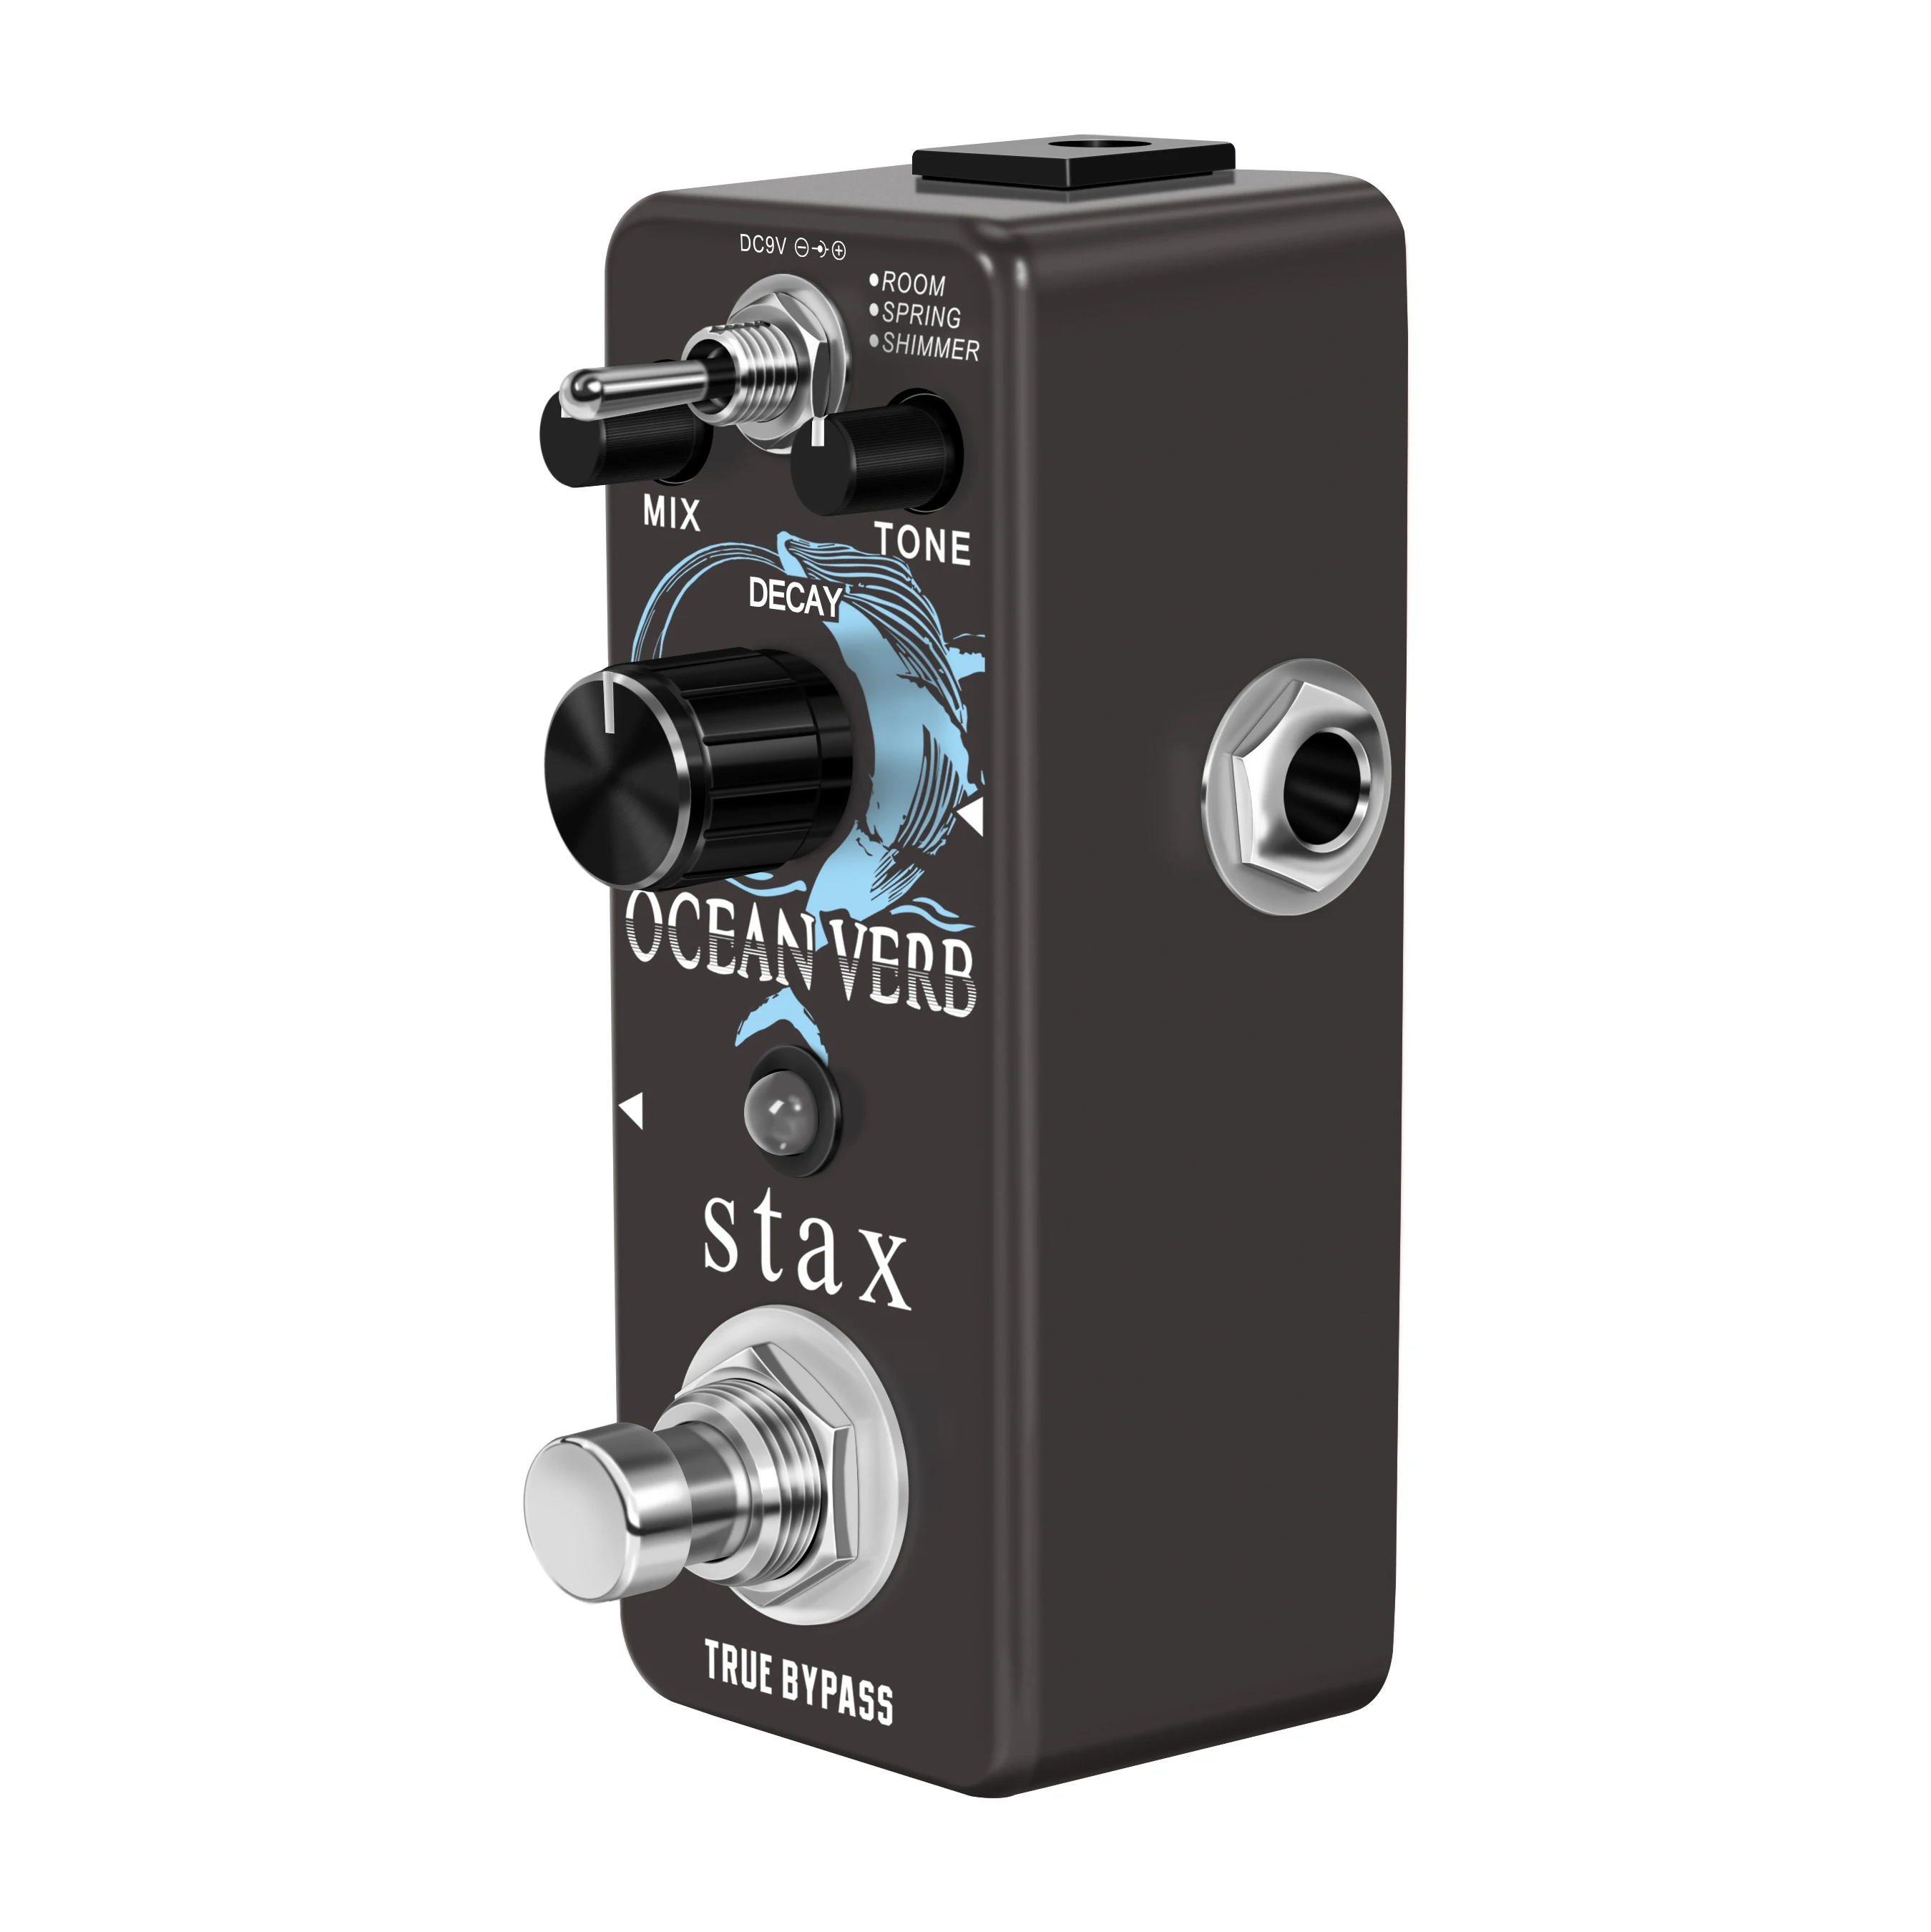 Stax Guitar Reverb Effect Pedal Digital Pedals Ocean Verb Pedal Room Spring Shimmer 3 Modes With True Bypass  LEF-3800 enlarge